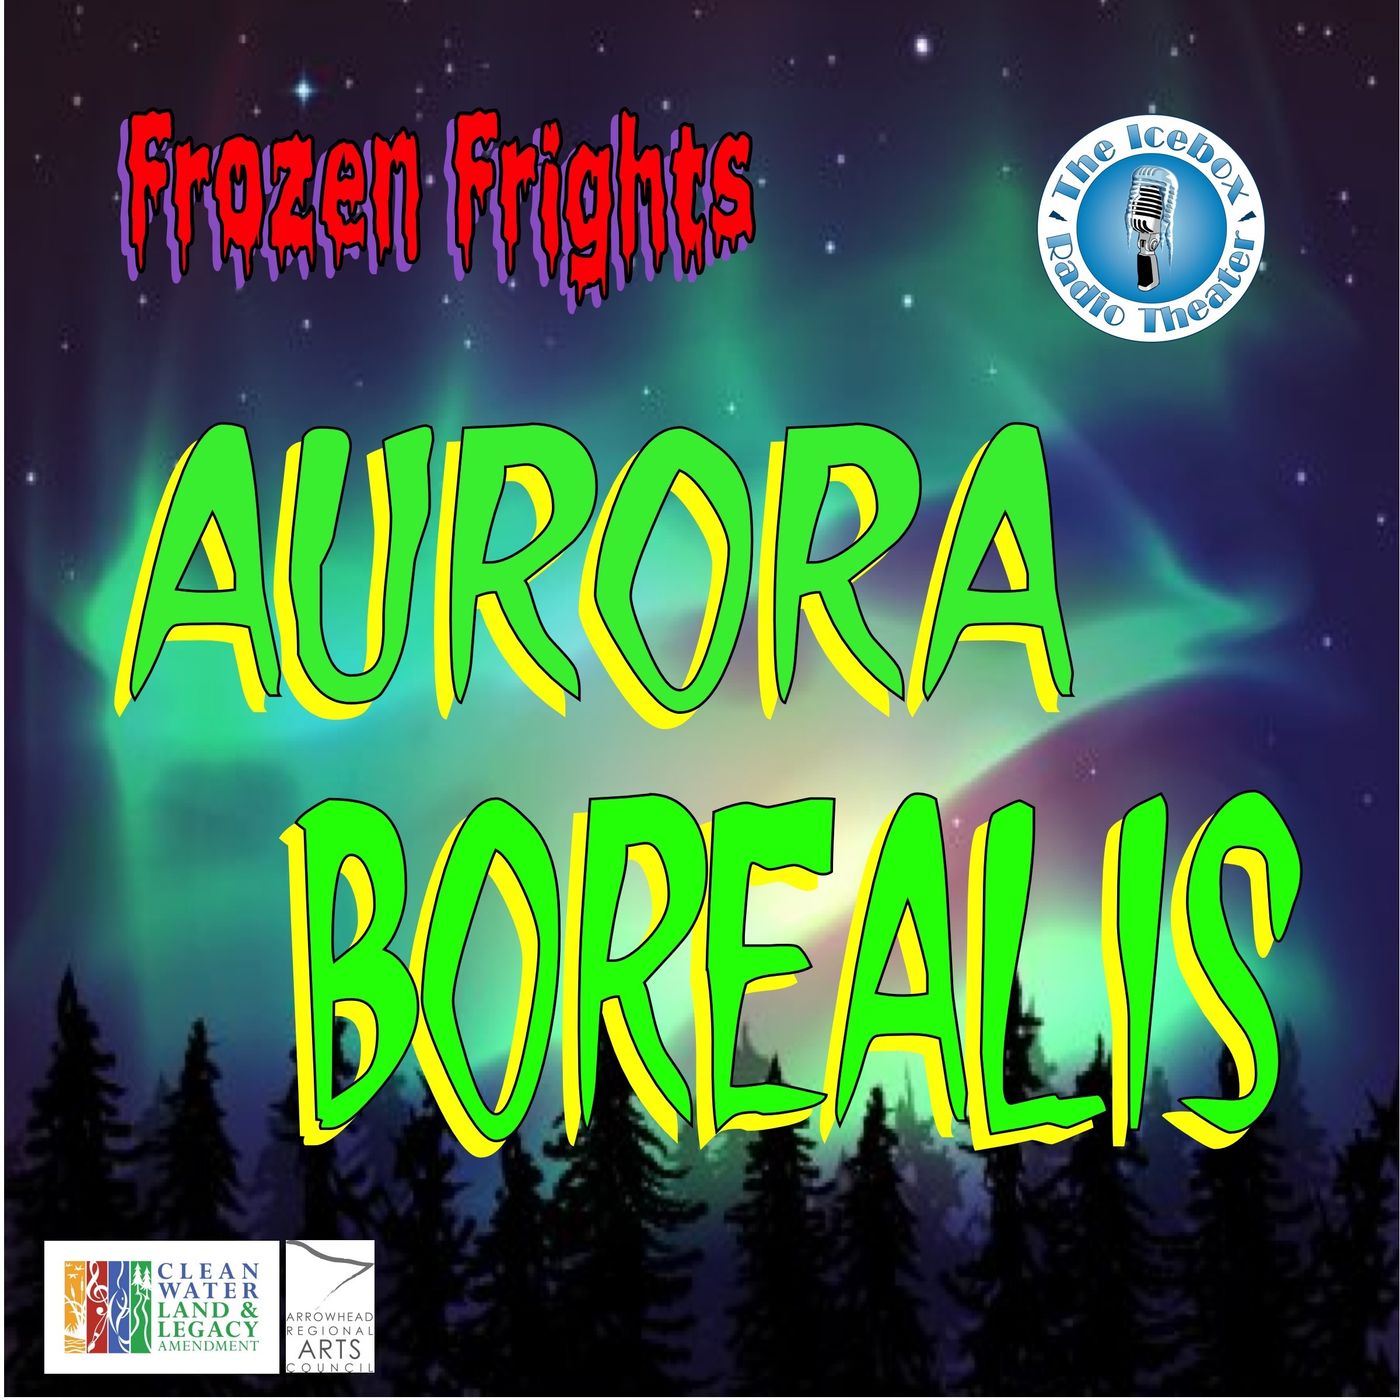 "The Frozen Frights Podcast" Podcast